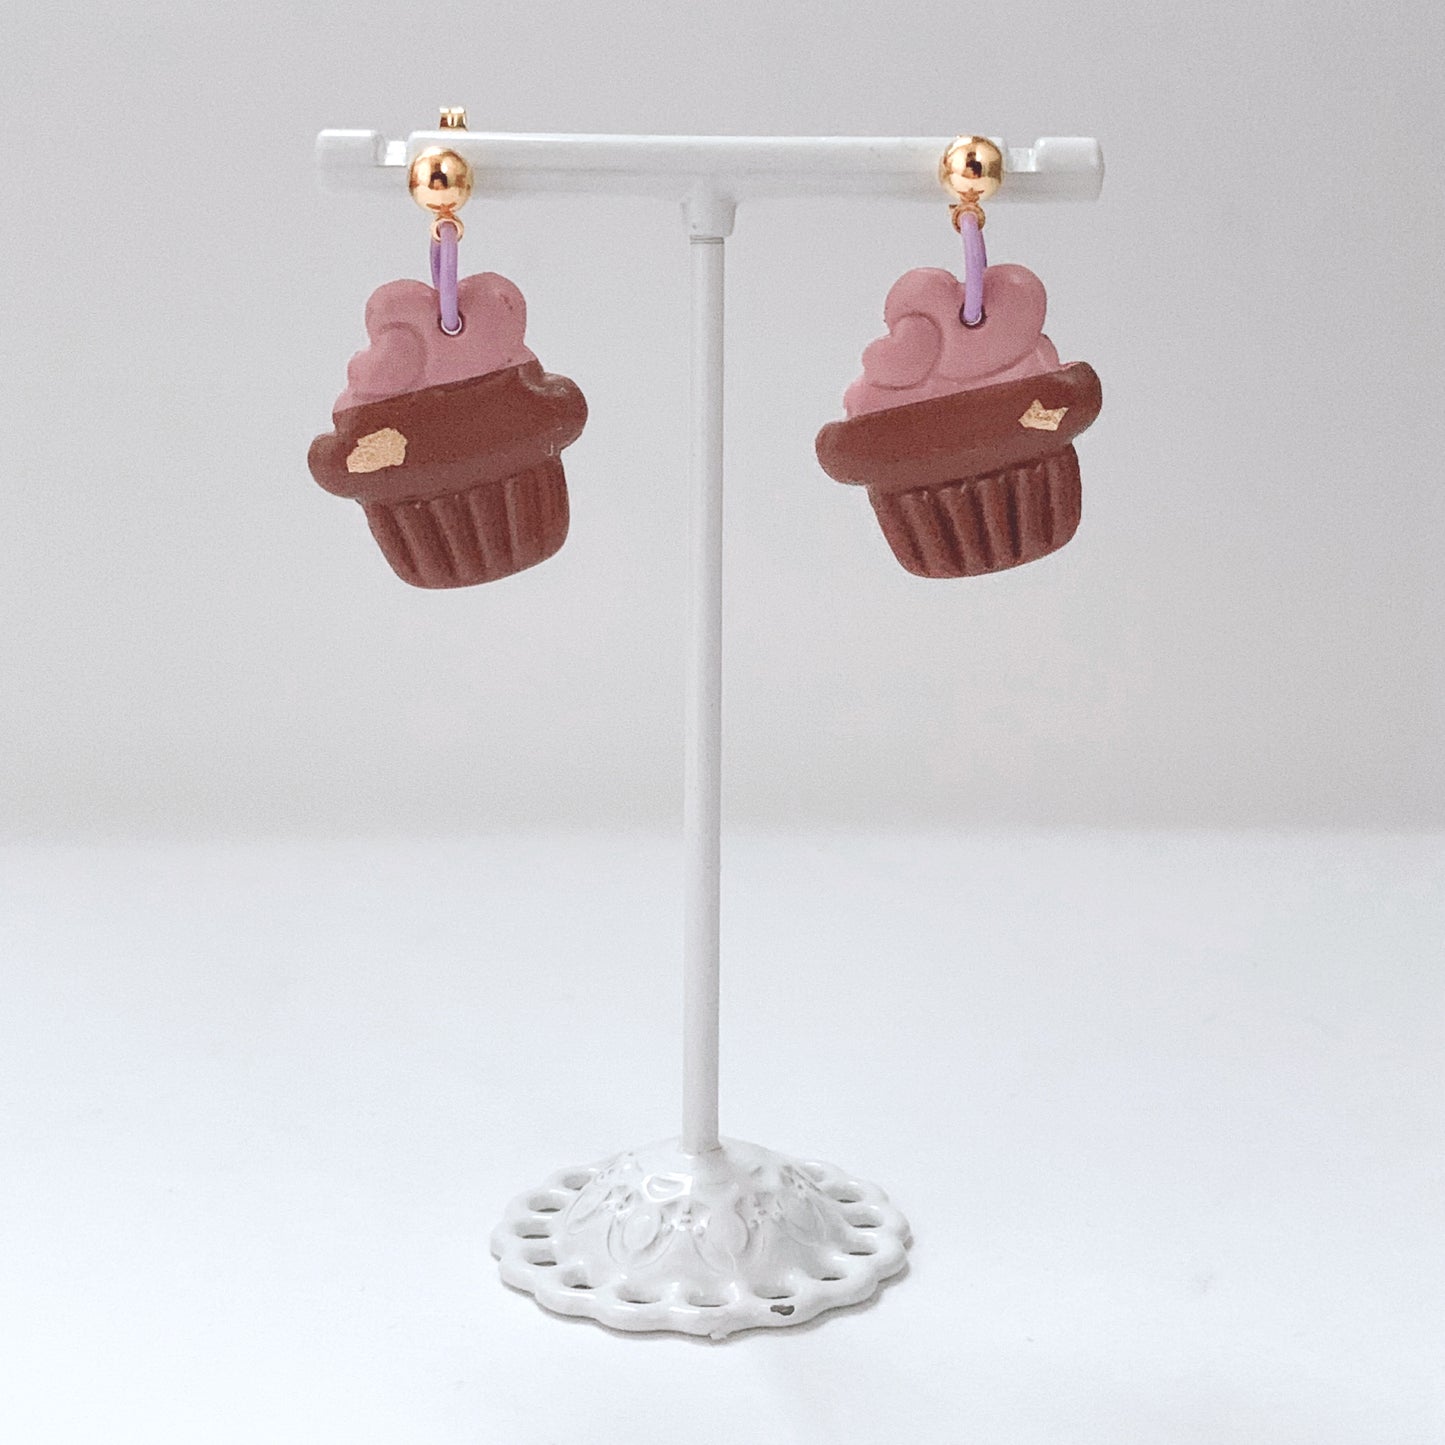 Cupcake Earrings Clay S925 stamped silver gold posts